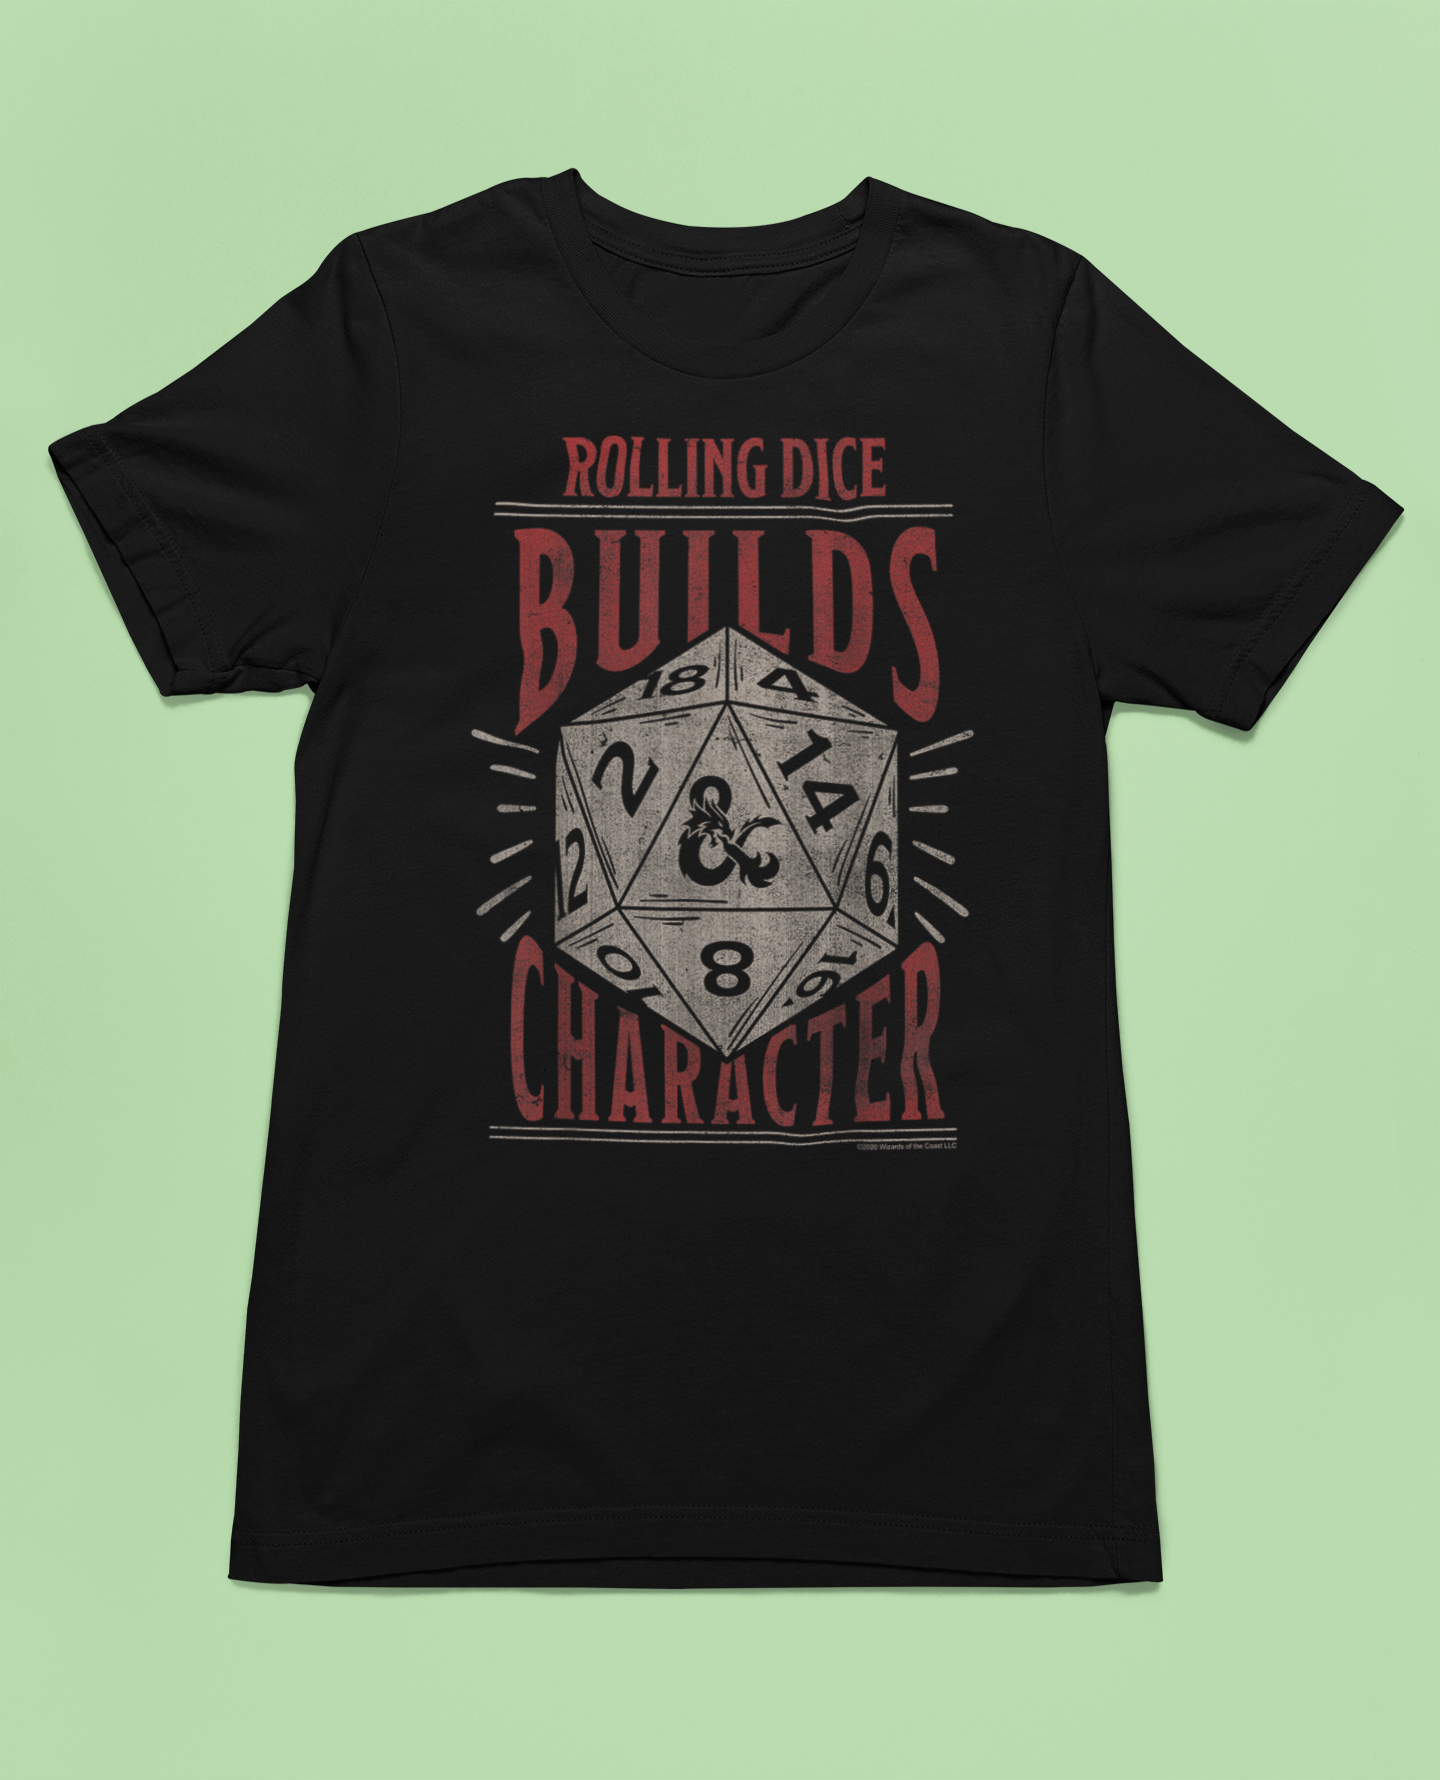 Black Rolling Dice Builds Character tee-shirt with gaming graphic text and dice illustration.